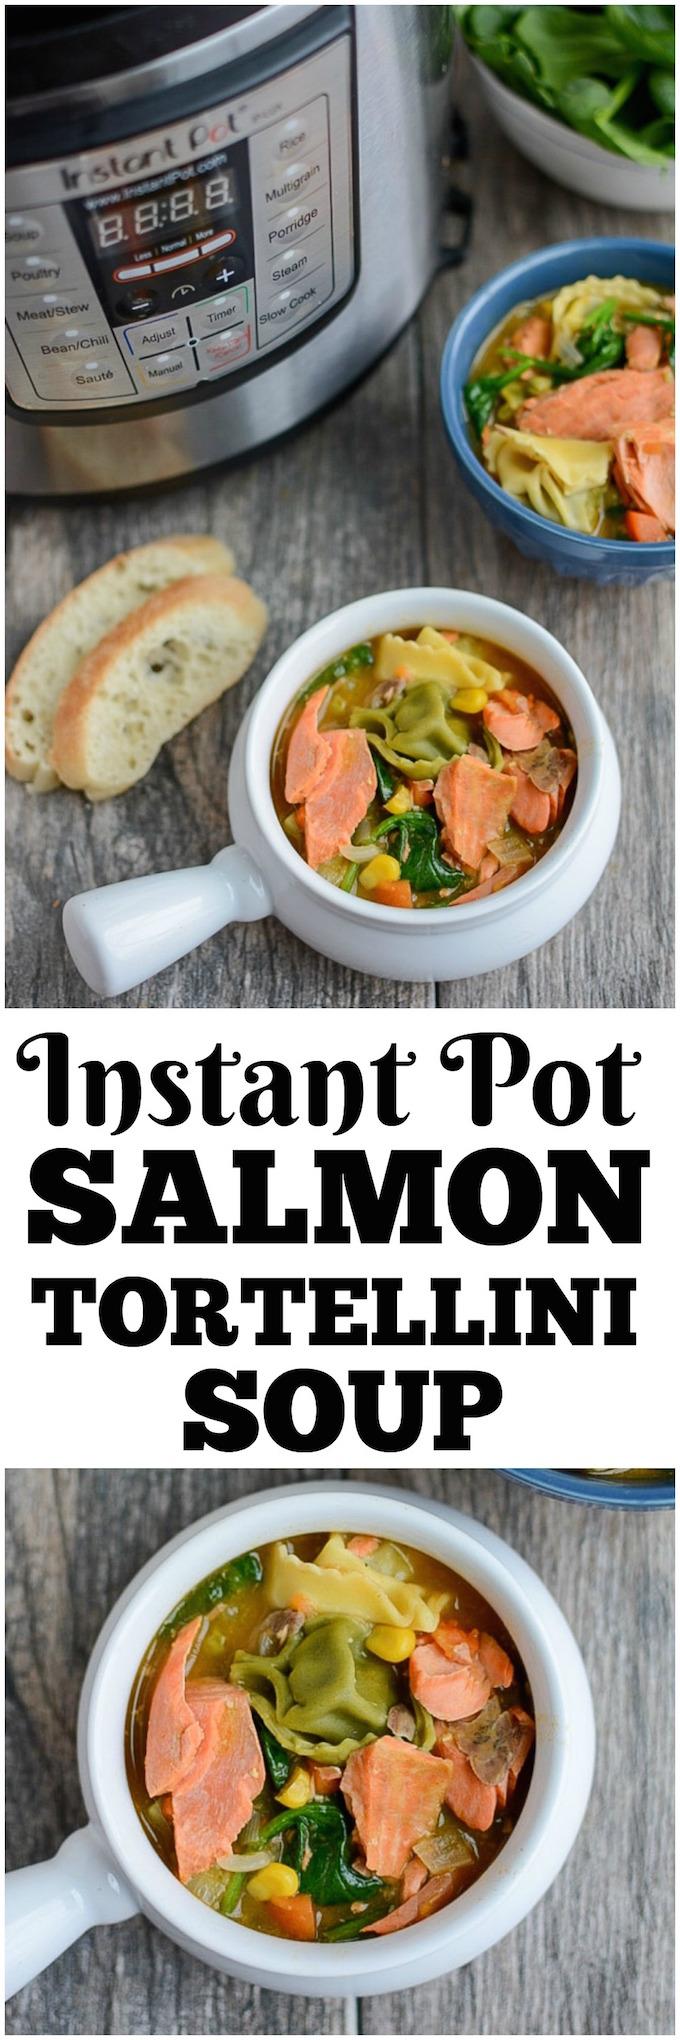 This Instant Pot Salmon Tortellini Soup recipe is simple, healthy and so easy to make for dinner. It uses ingredients from your freezer so its perfect for a night when you need a last minute meal. 